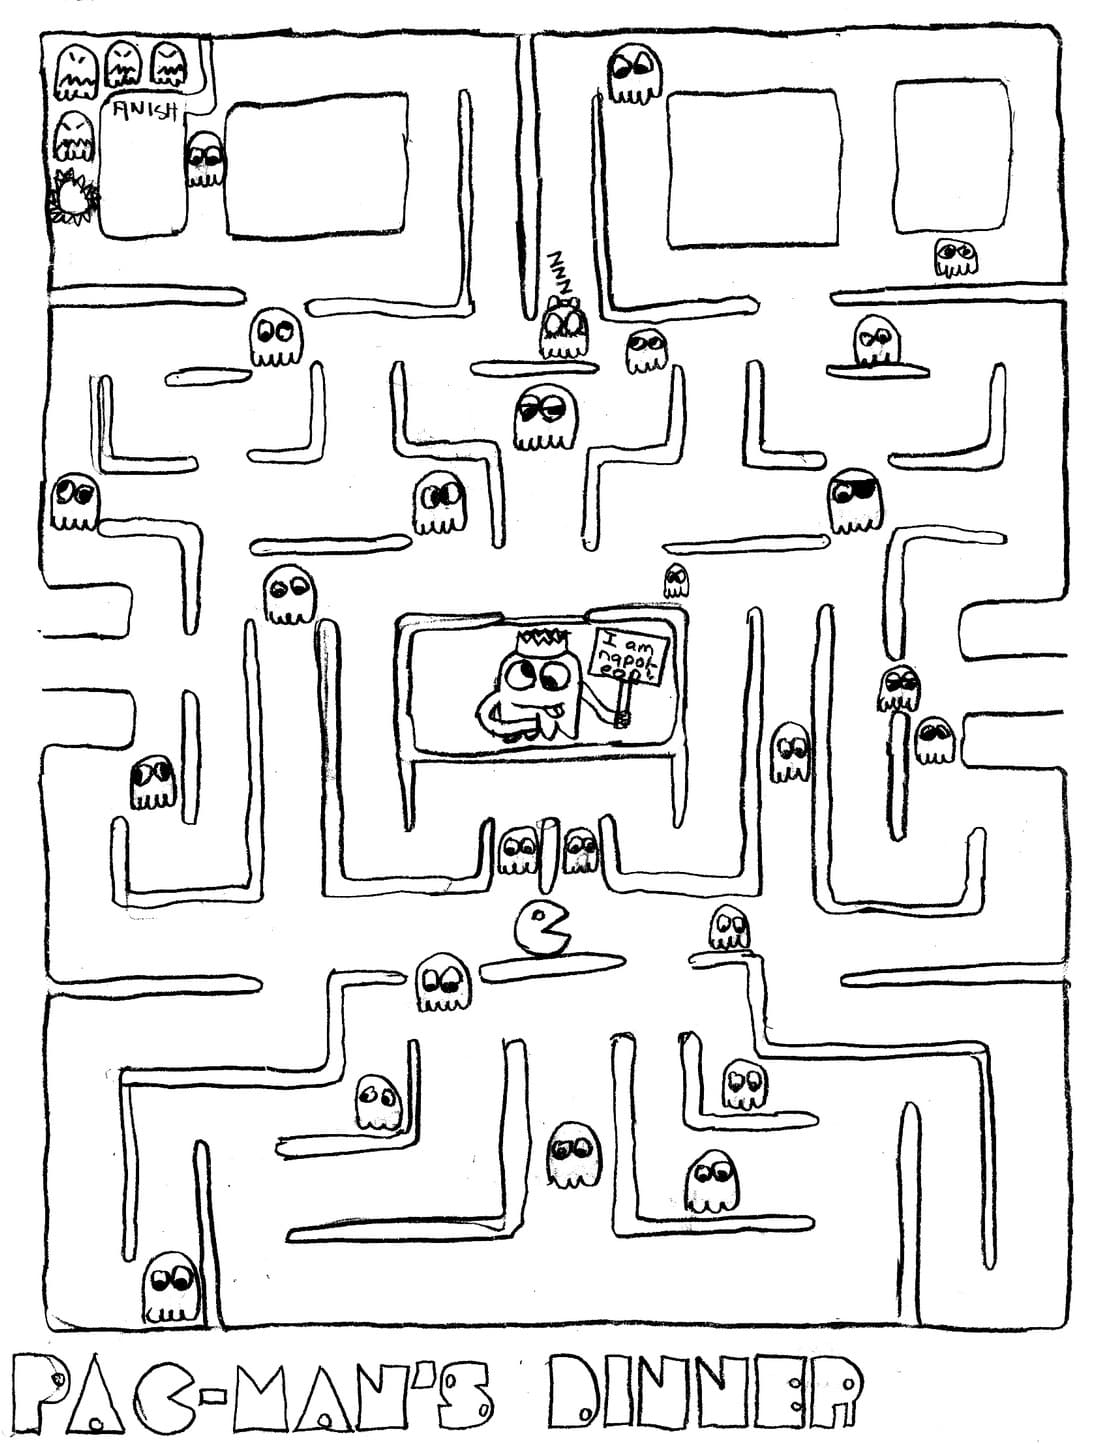 Pac man coloring pages best printable coloring pages